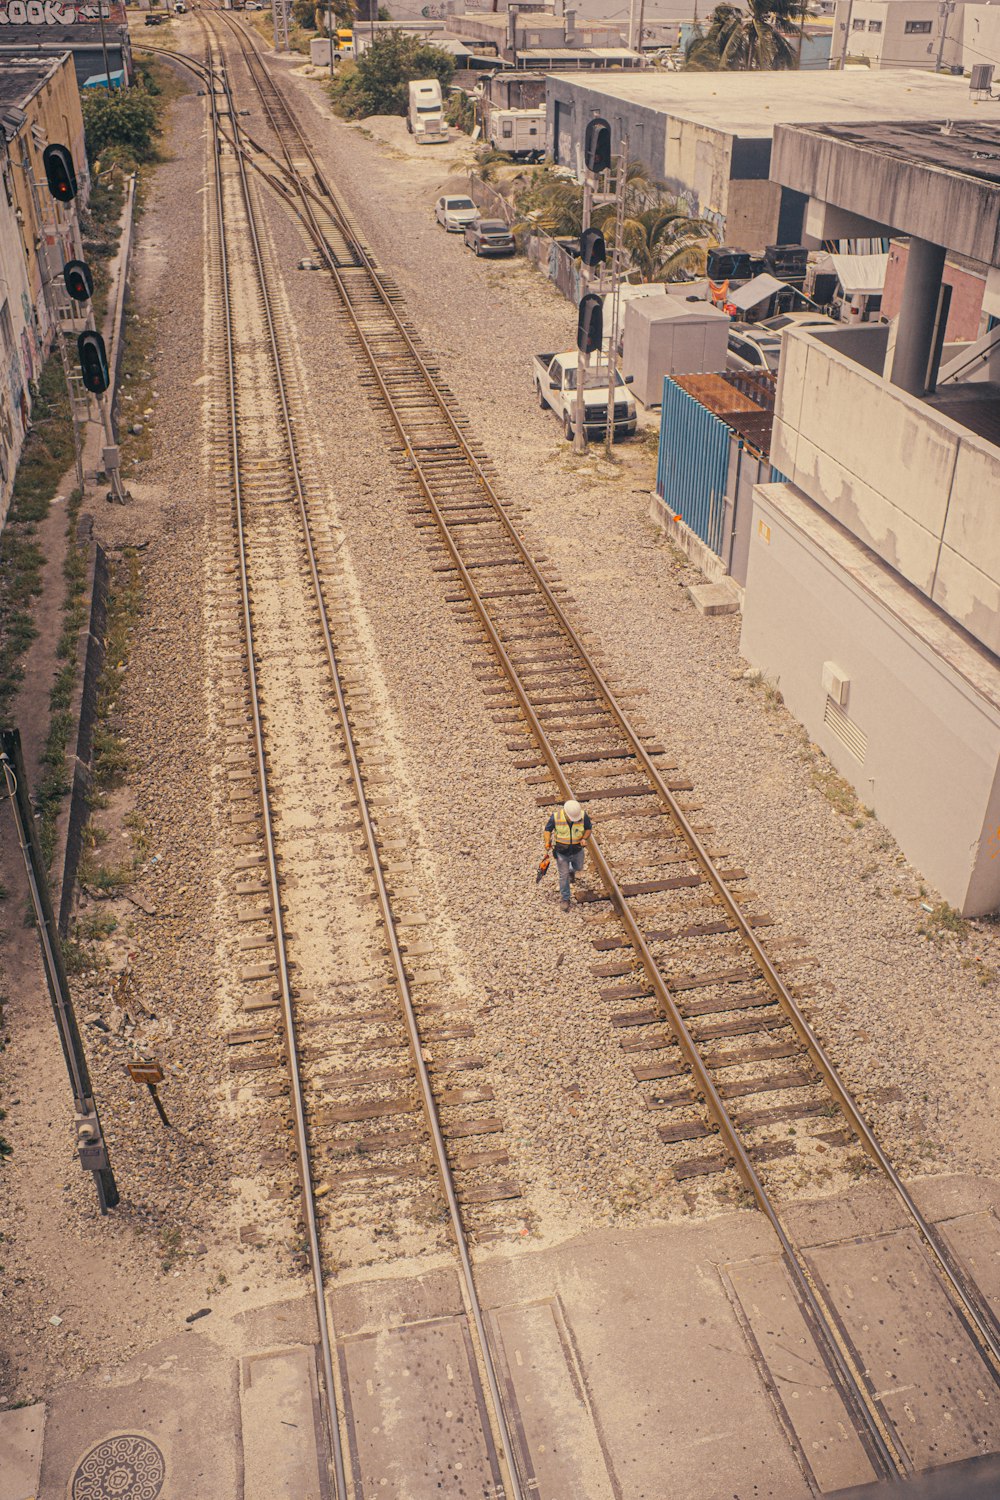 a man is standing on a train track